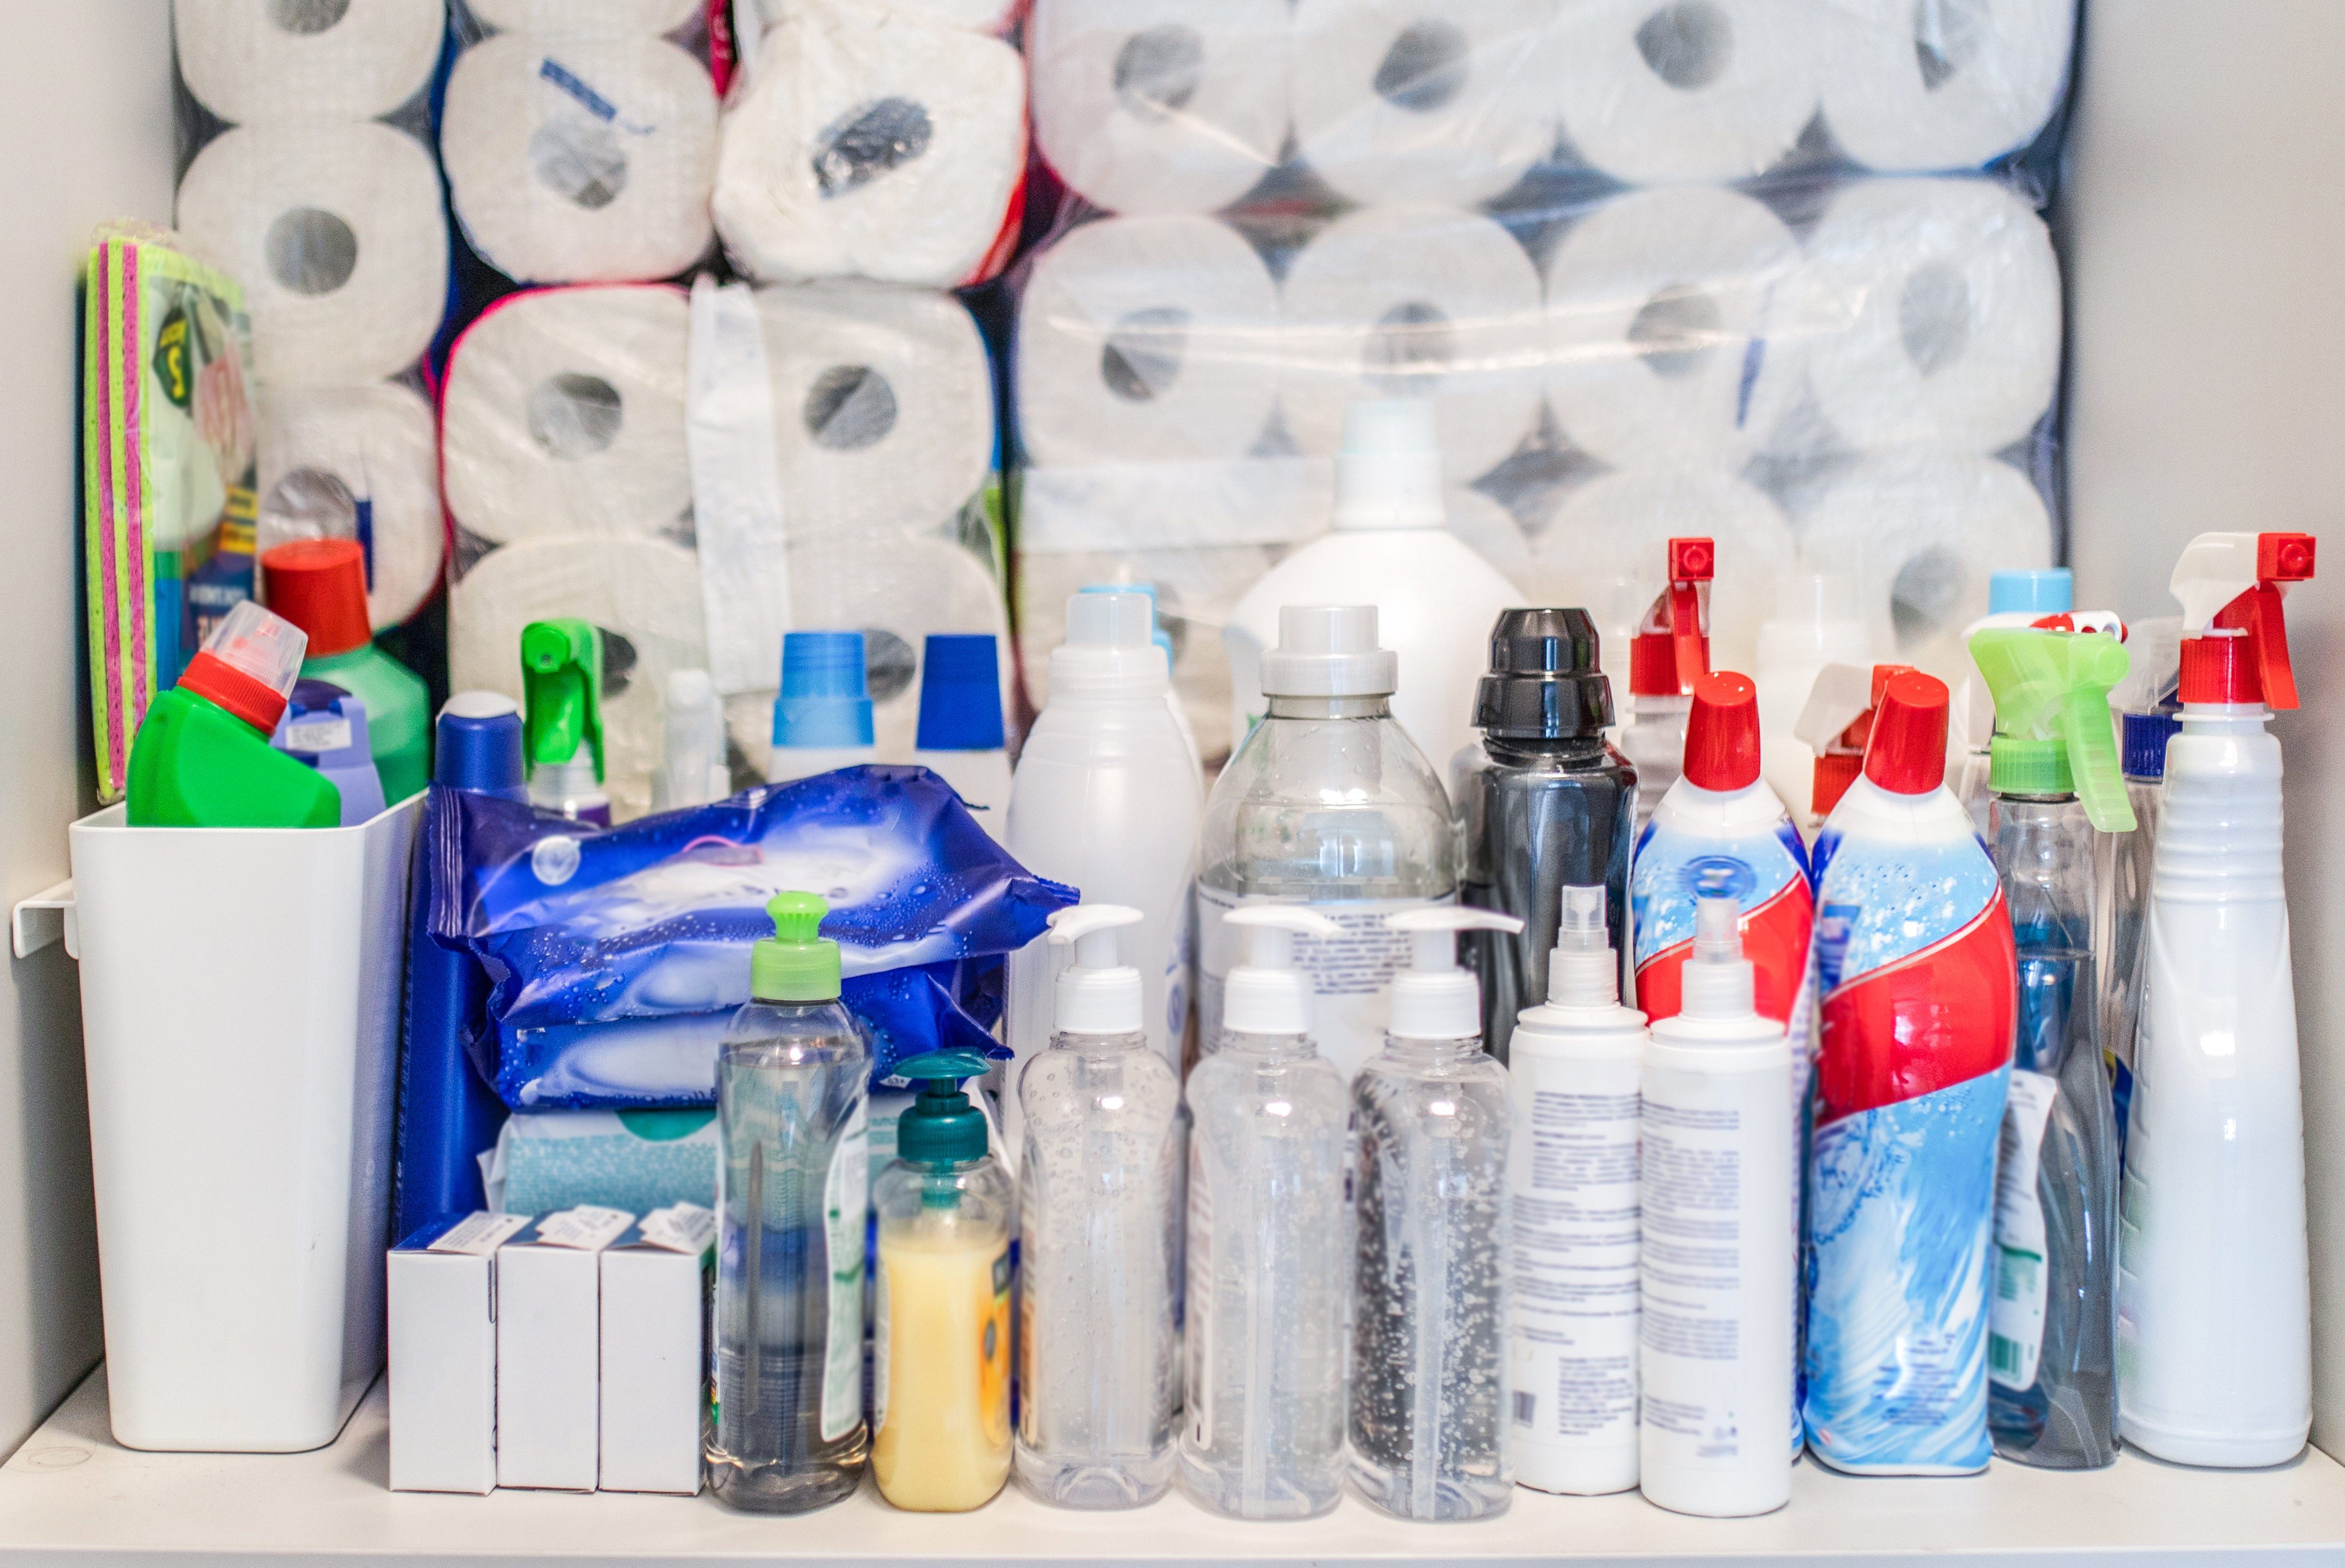 Hoarding food, toilet paper and cleaning products